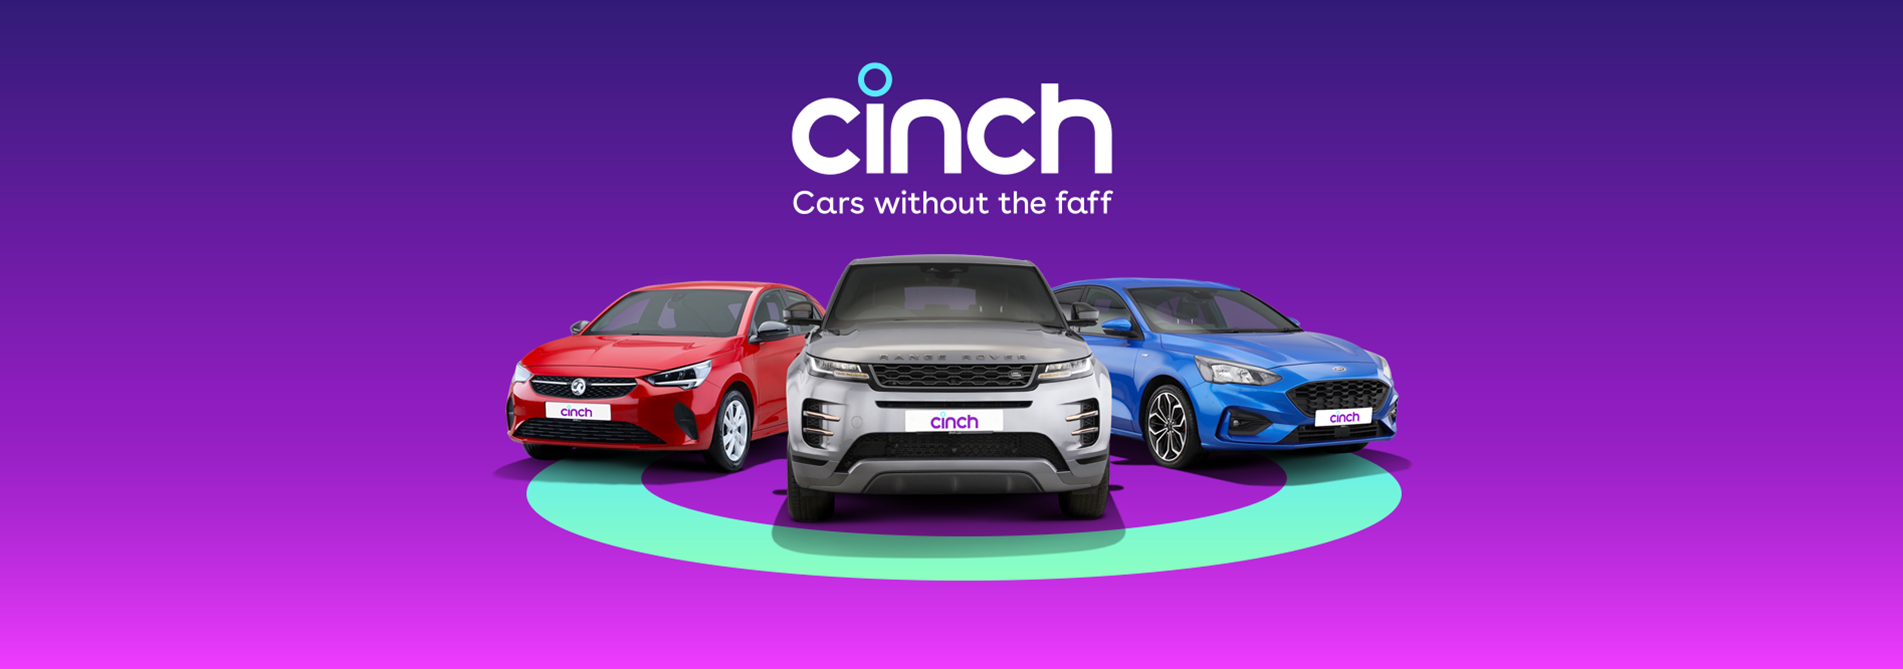 cinch cars without the faff CarFest